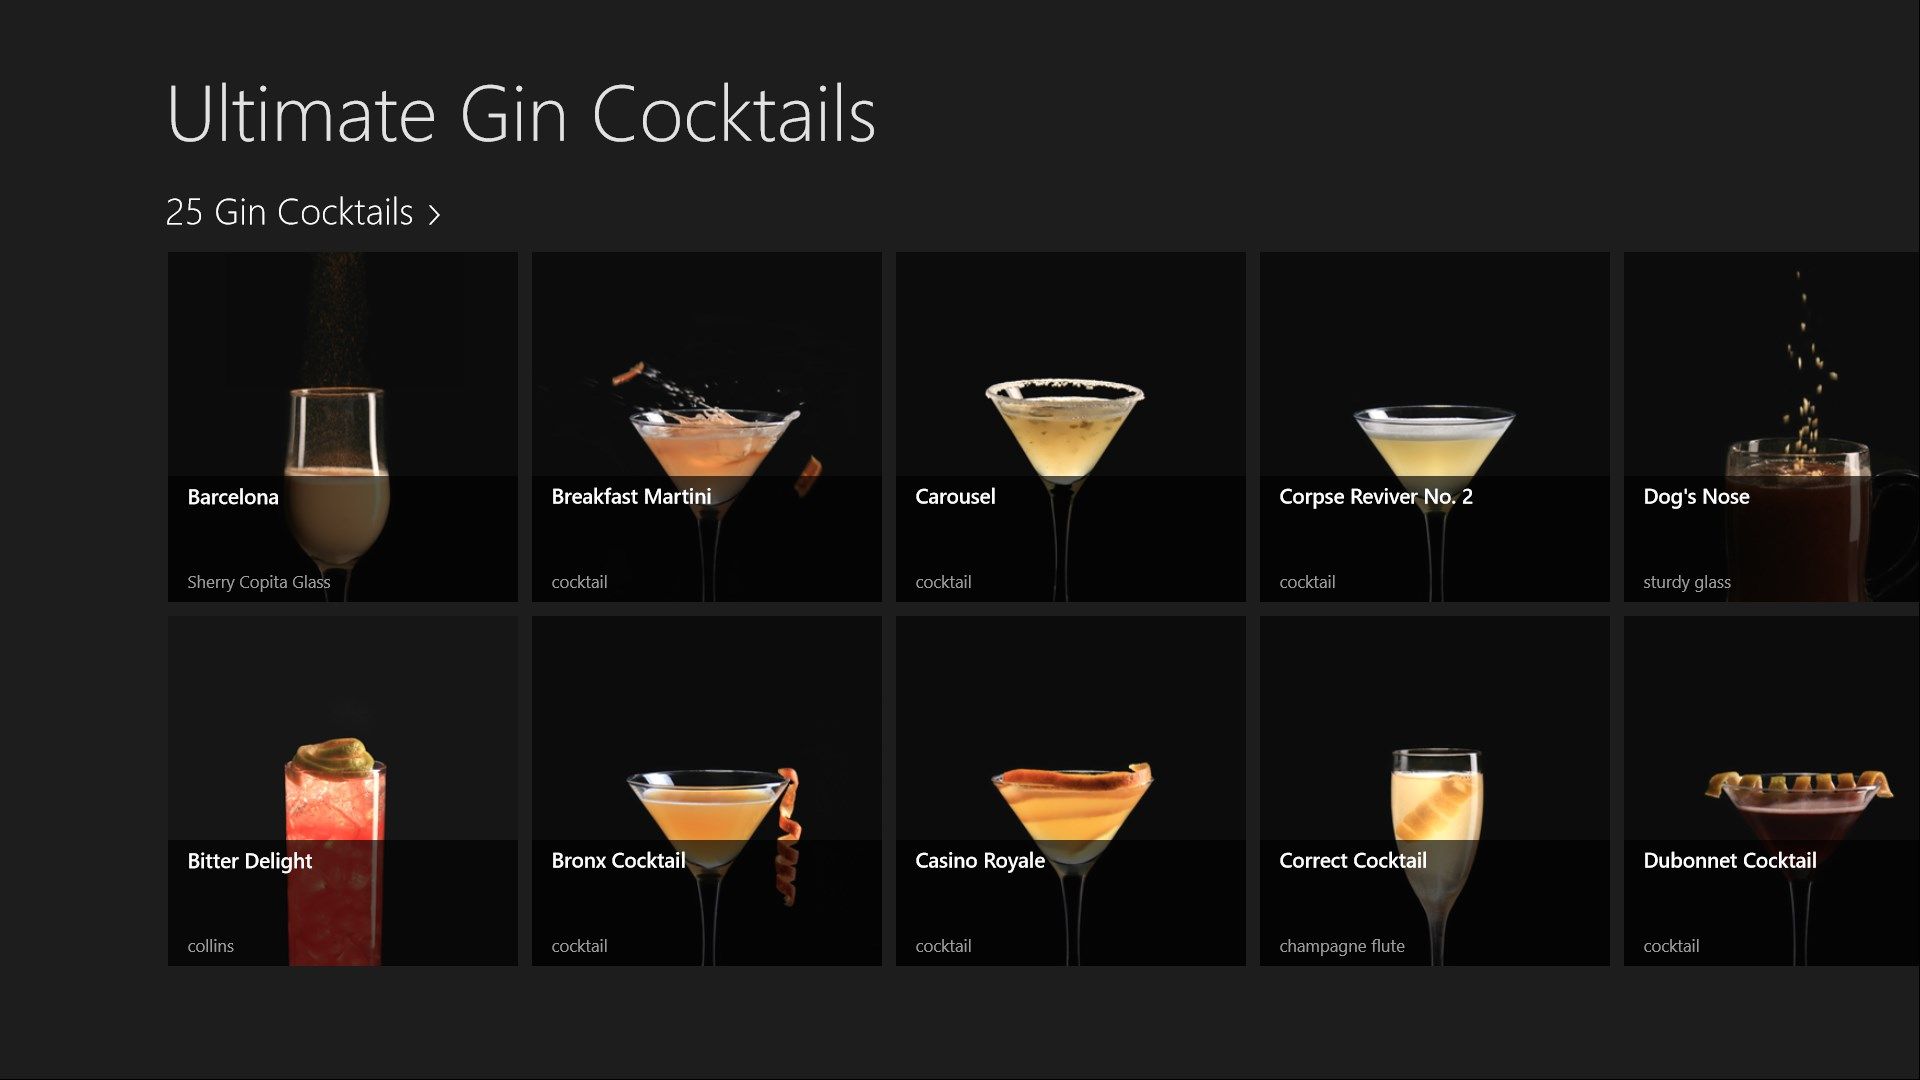 Start with images of all the cocktails